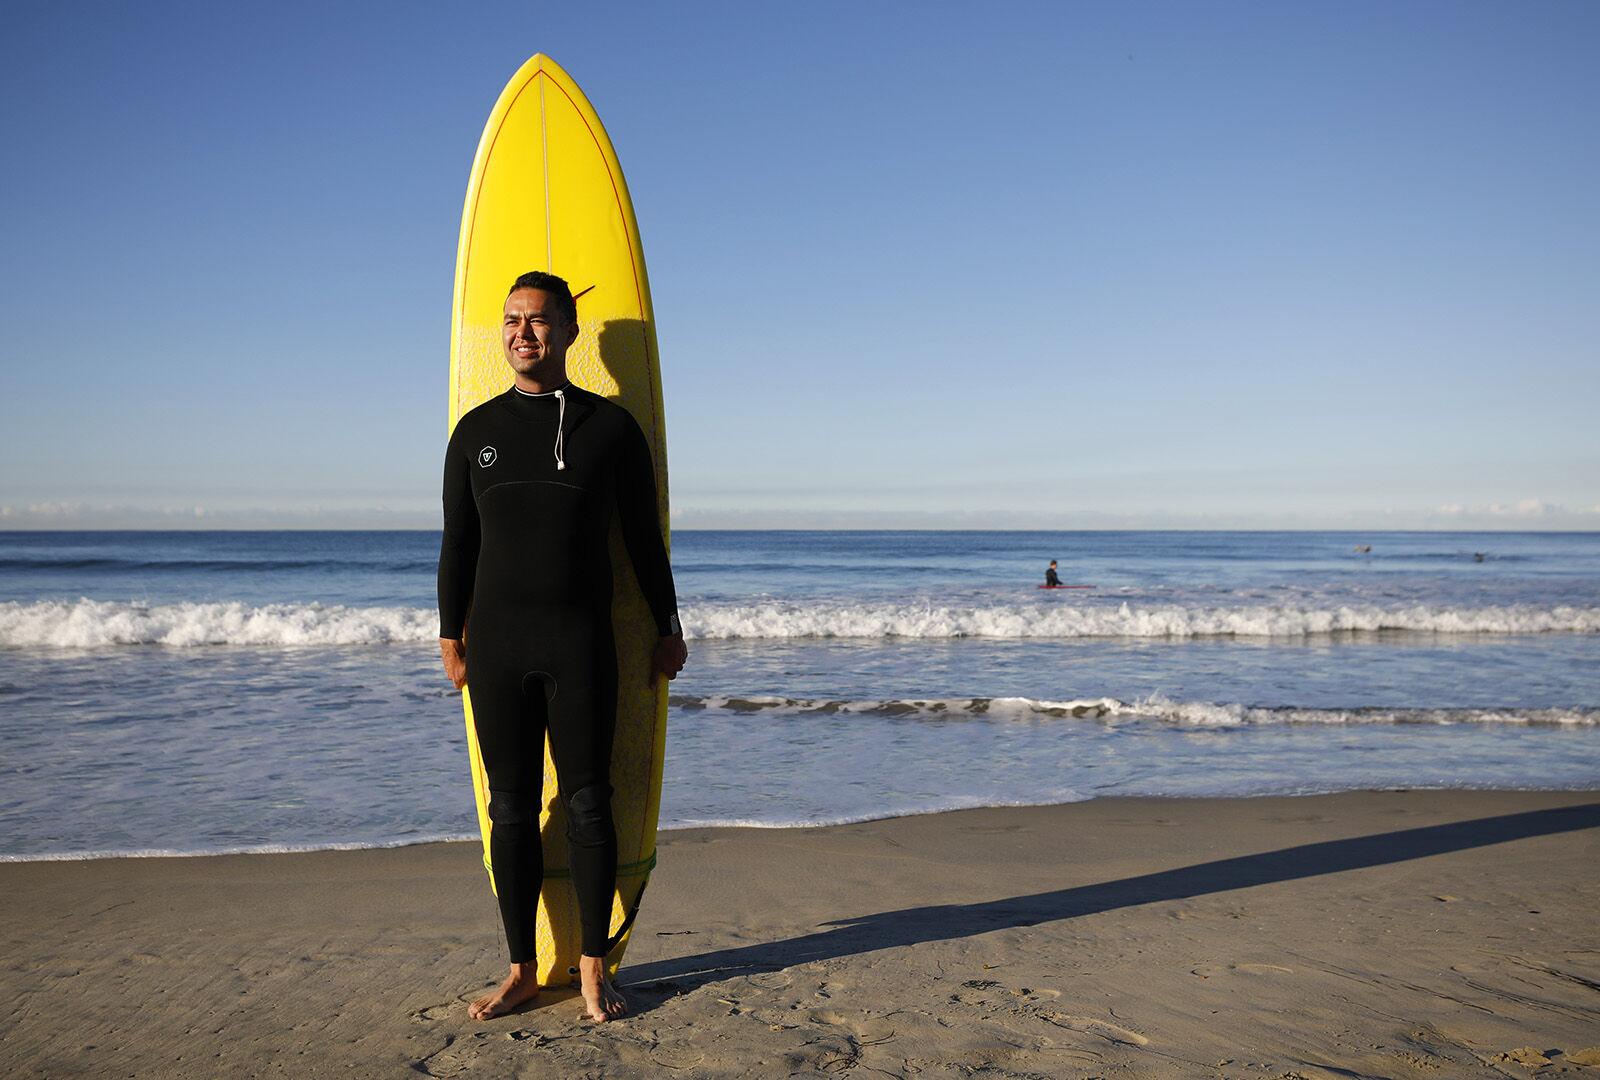 Taylor Smith is the CEO and co-founder of Blueboard, an employee rewards company that teller bosses gift cool experiences such as surf lessons to employees.    PHOTO CREDIT: Tribune News Service